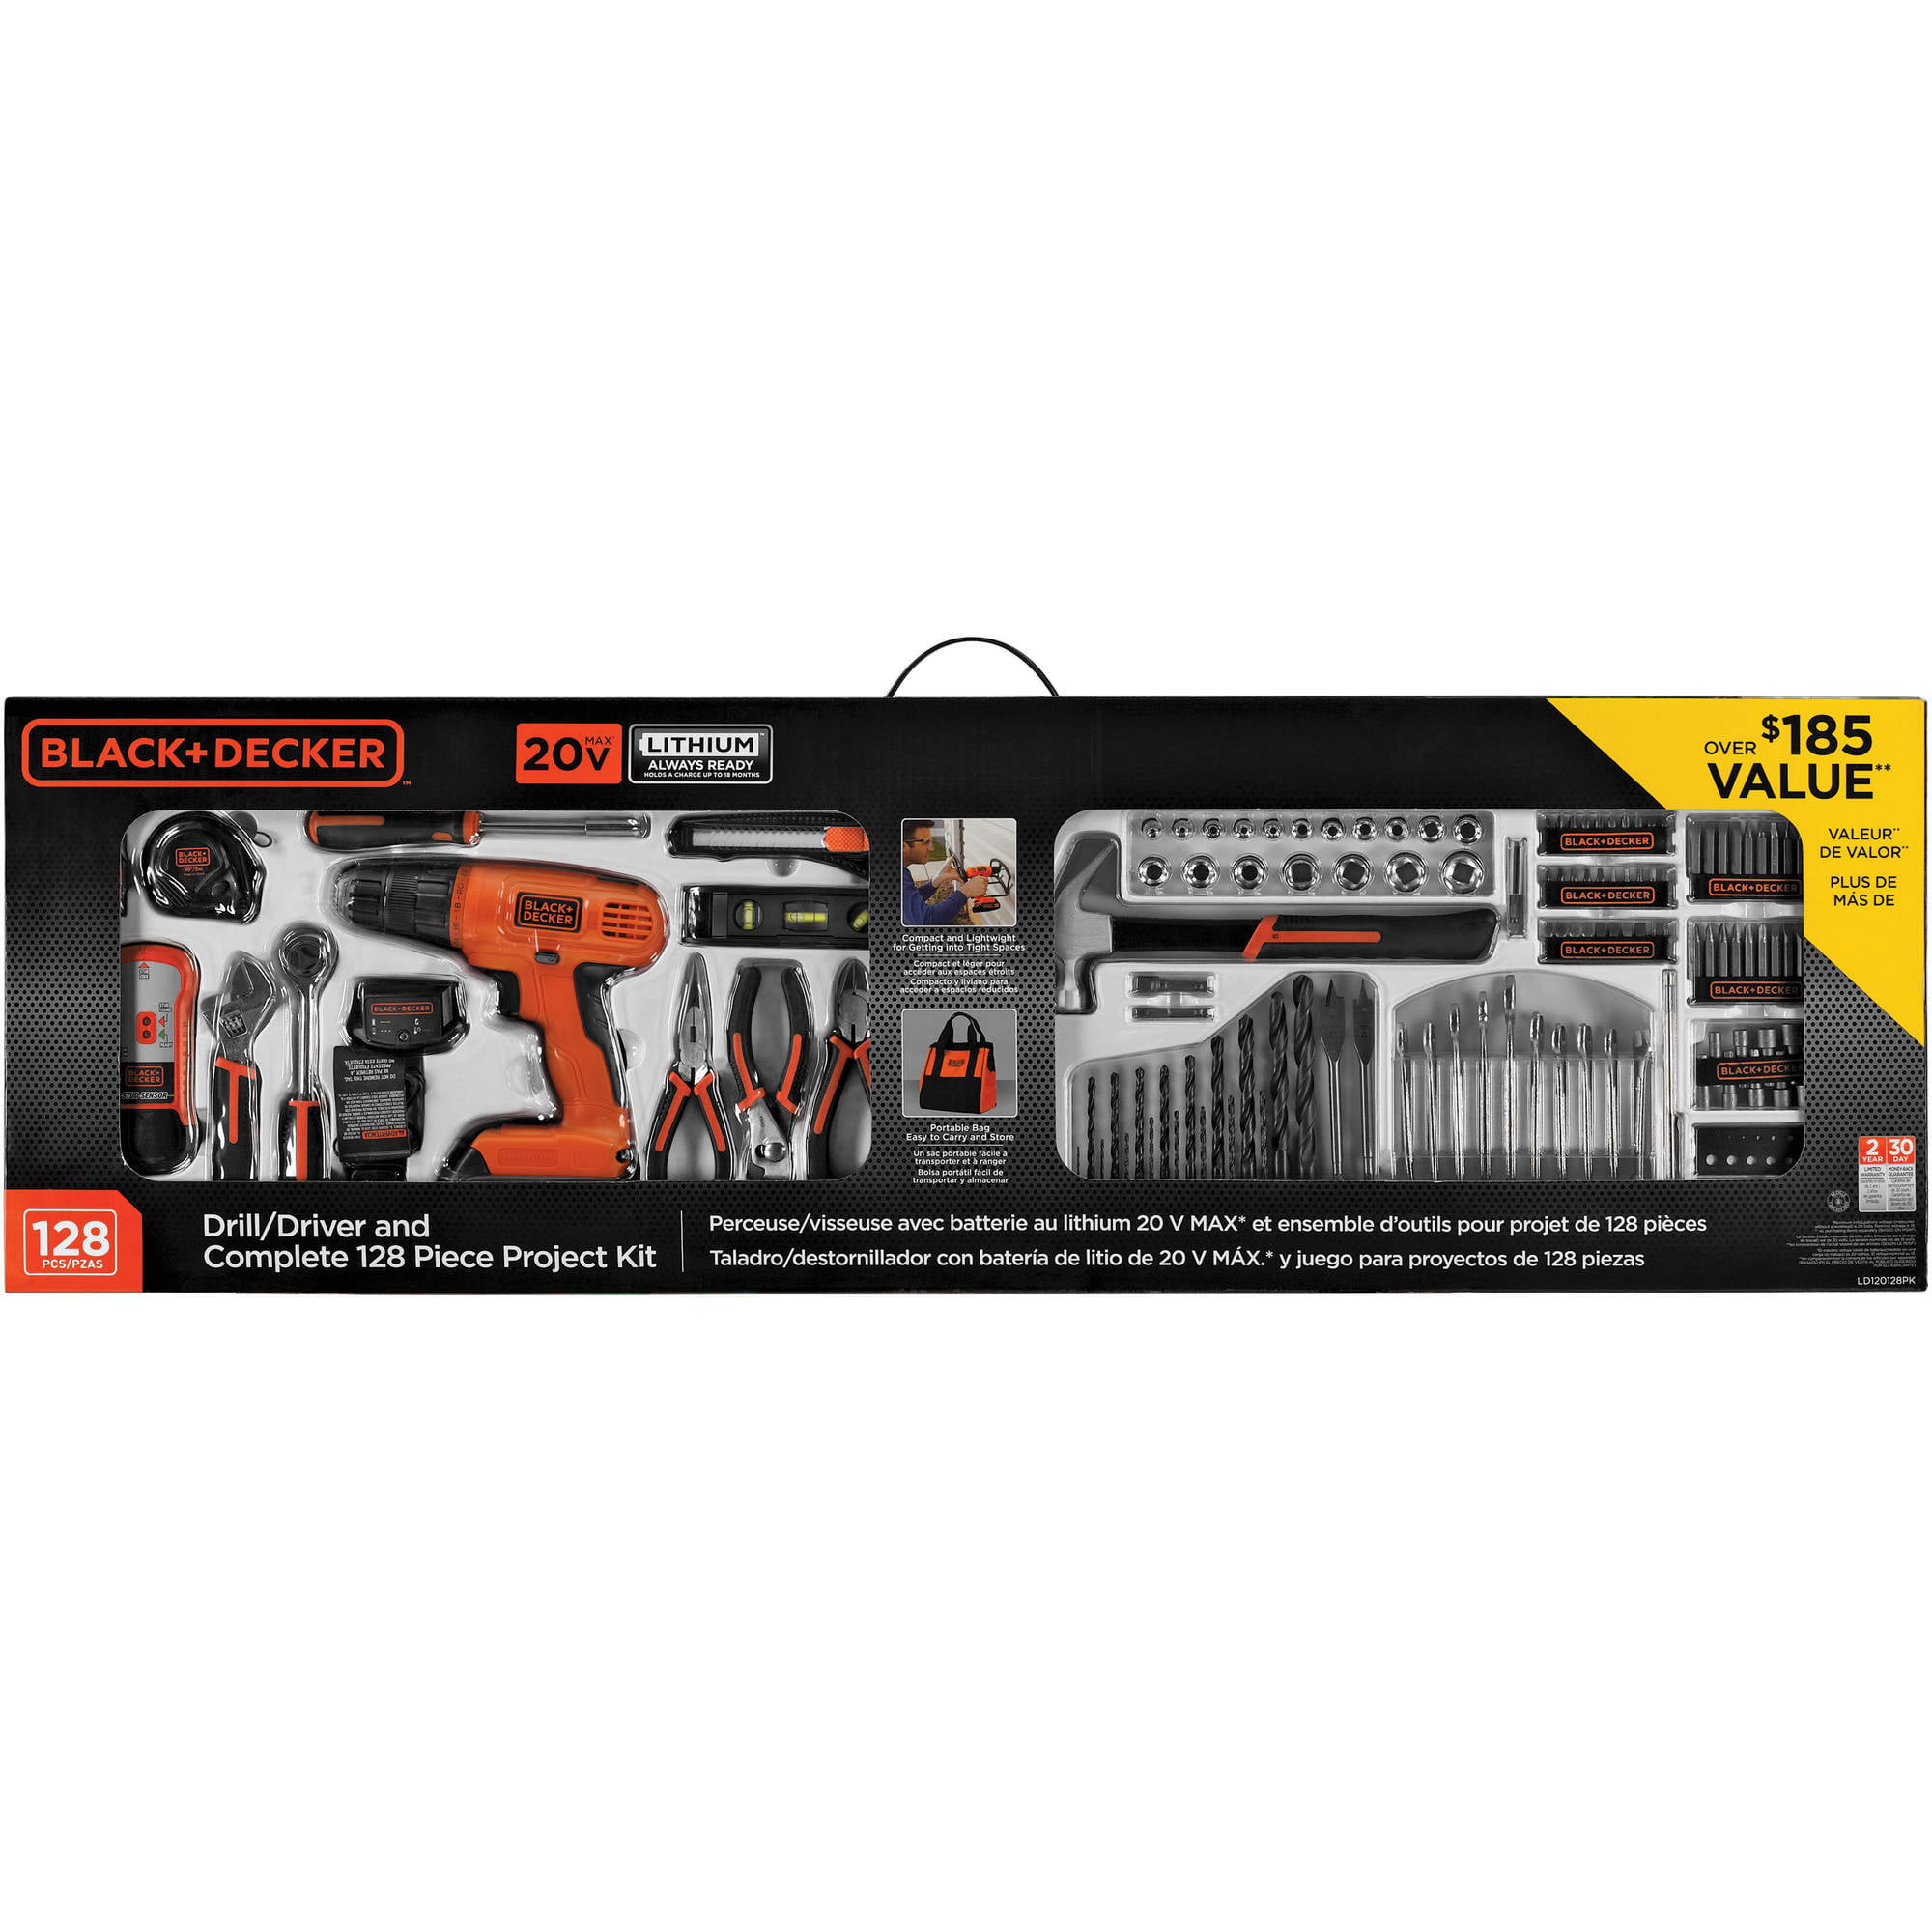 Get A 4 Piece Black & Decker Drill Kit For Just $99 This Cyber Monday – SPY